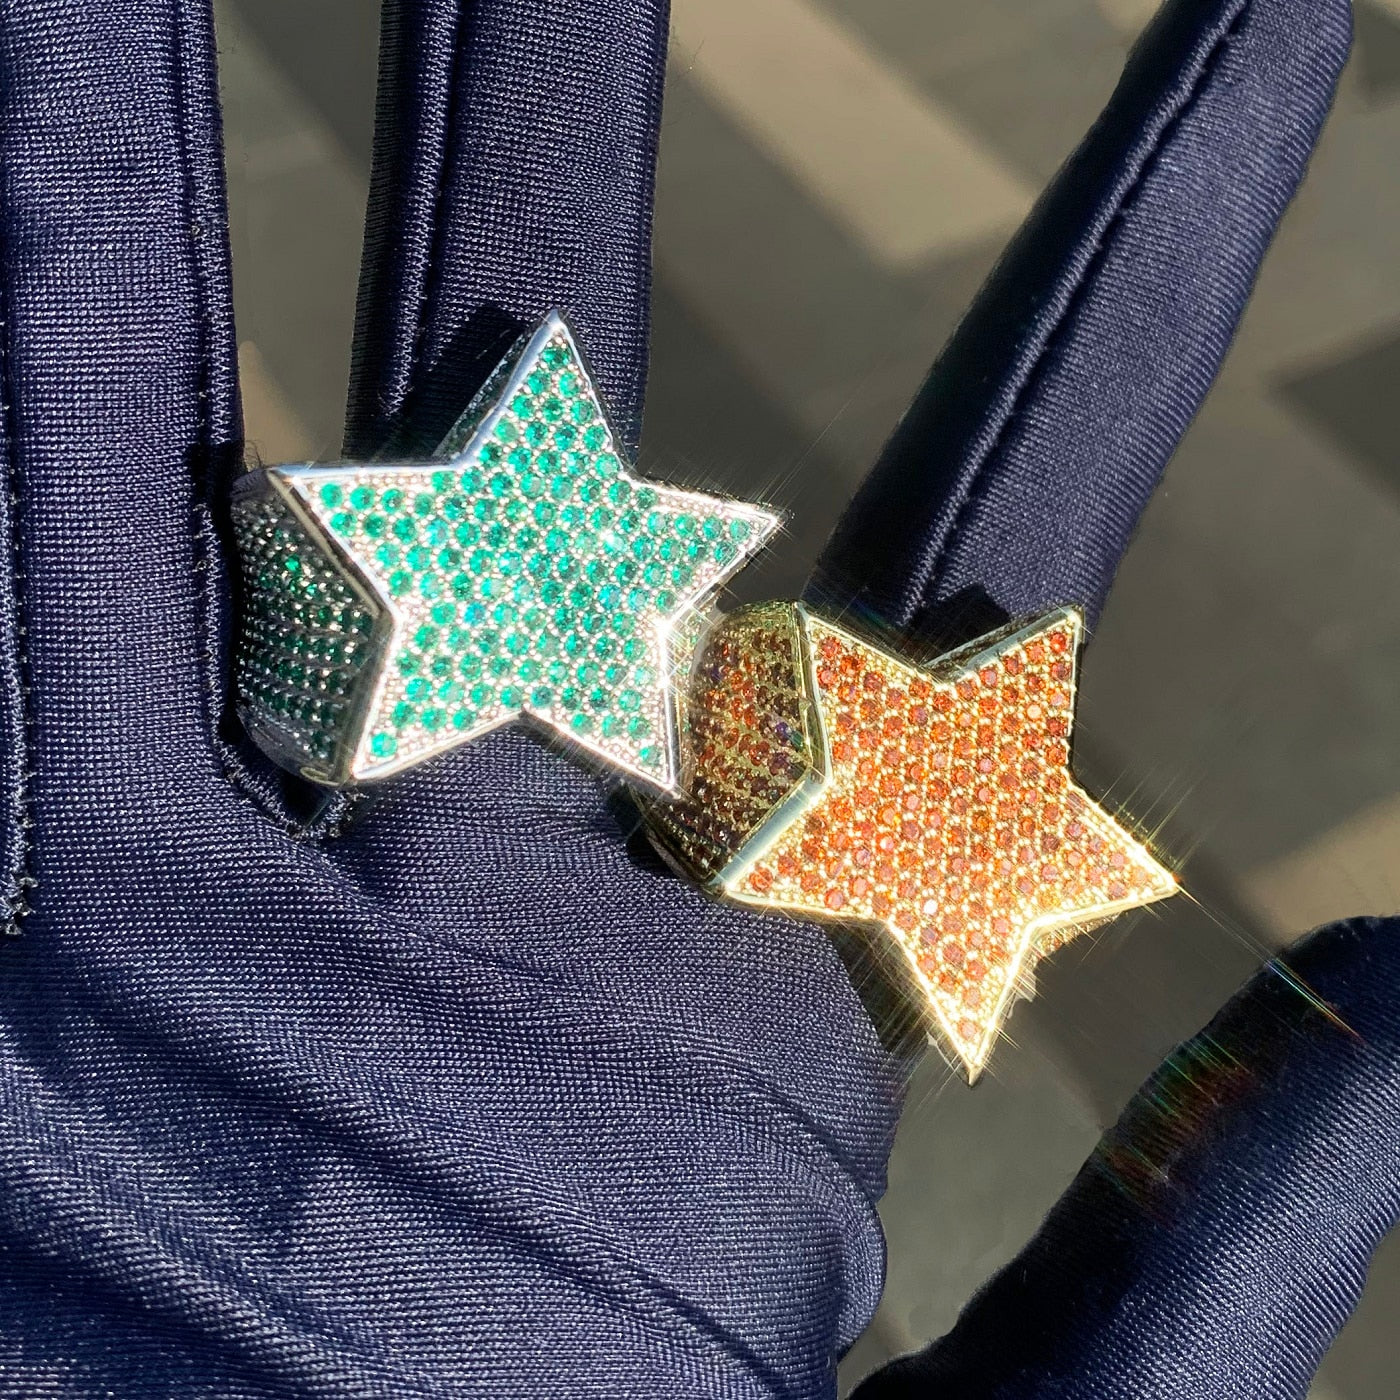 Star Ring | Star Shaped Diamond Ring | Fully Iced Out Star Ring